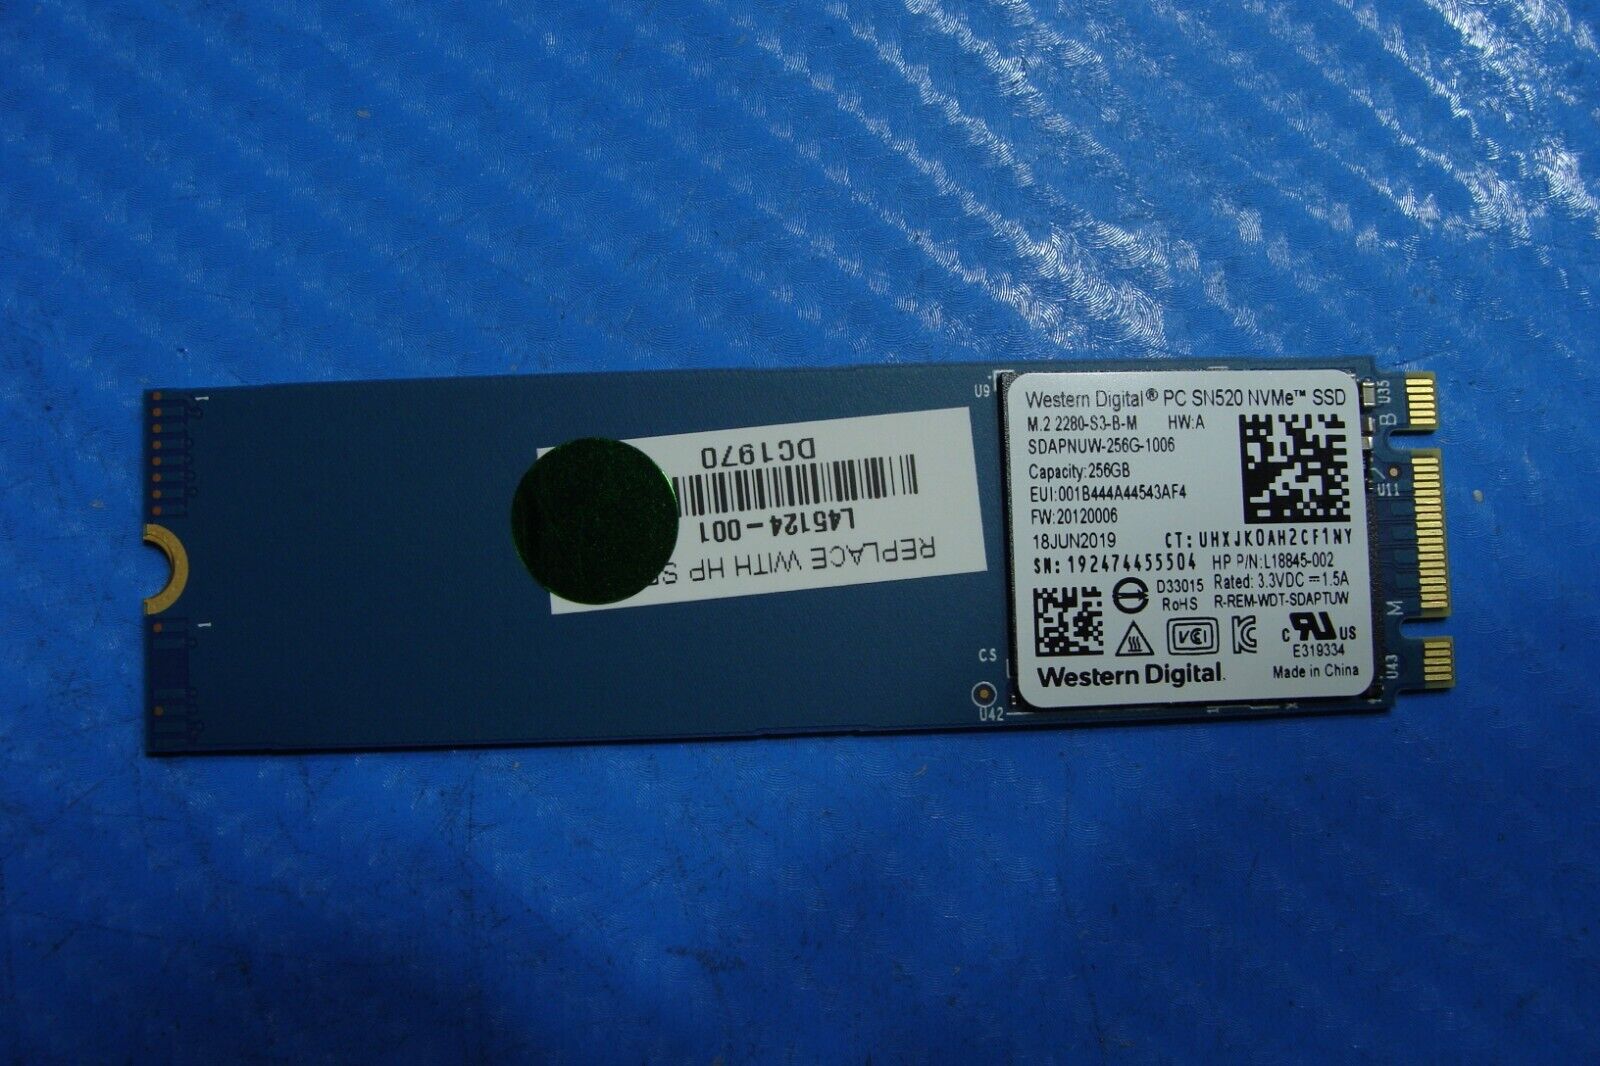 HP Probook 450 G6 15.6 WD 256Gb NVMe M.2 Ssd Solid State Drive SDAPNUW-256G-1006